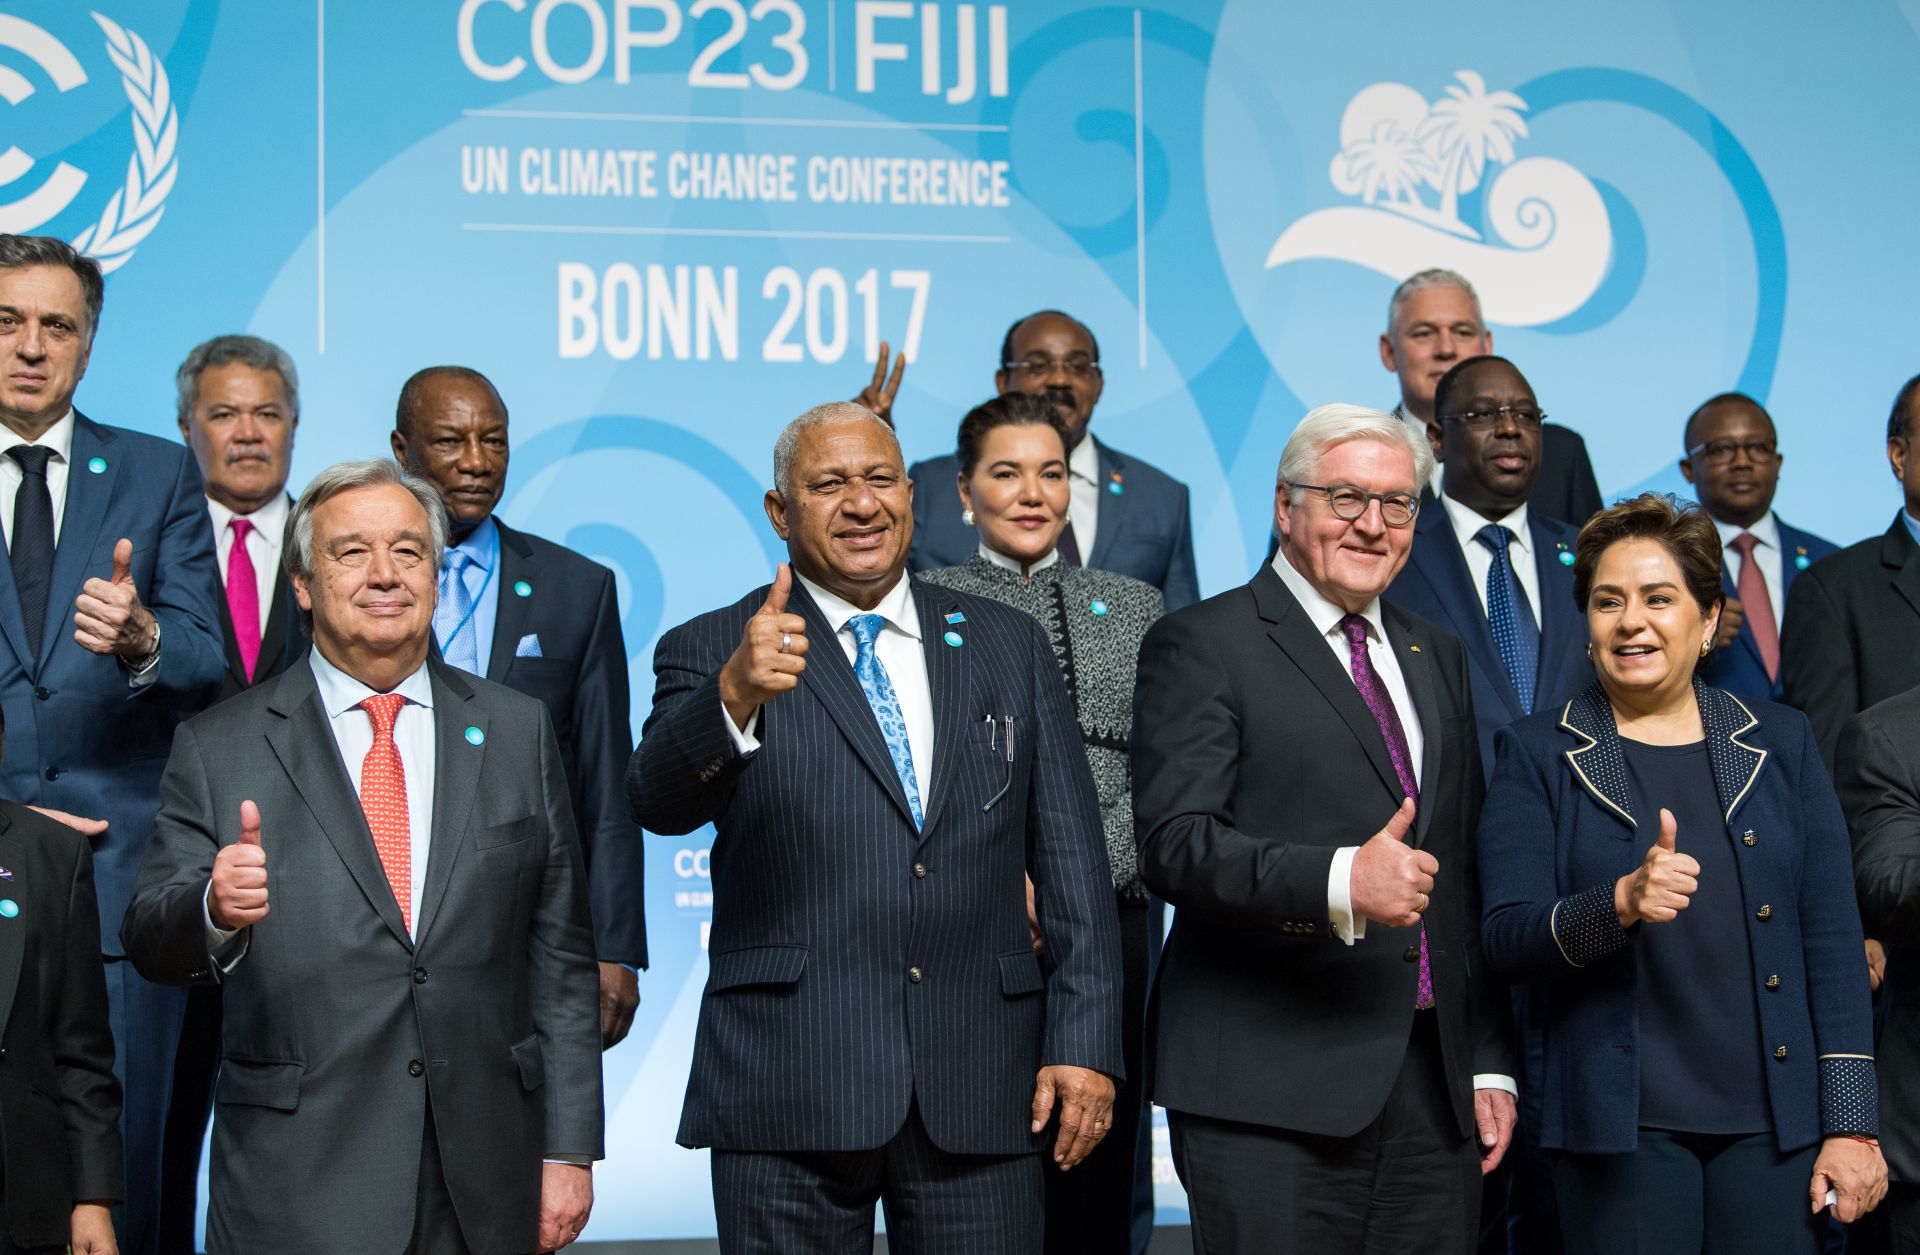 A picture of world leaders at the COP 23 United Nations Climate Conference In Bonn, Nov. 15.